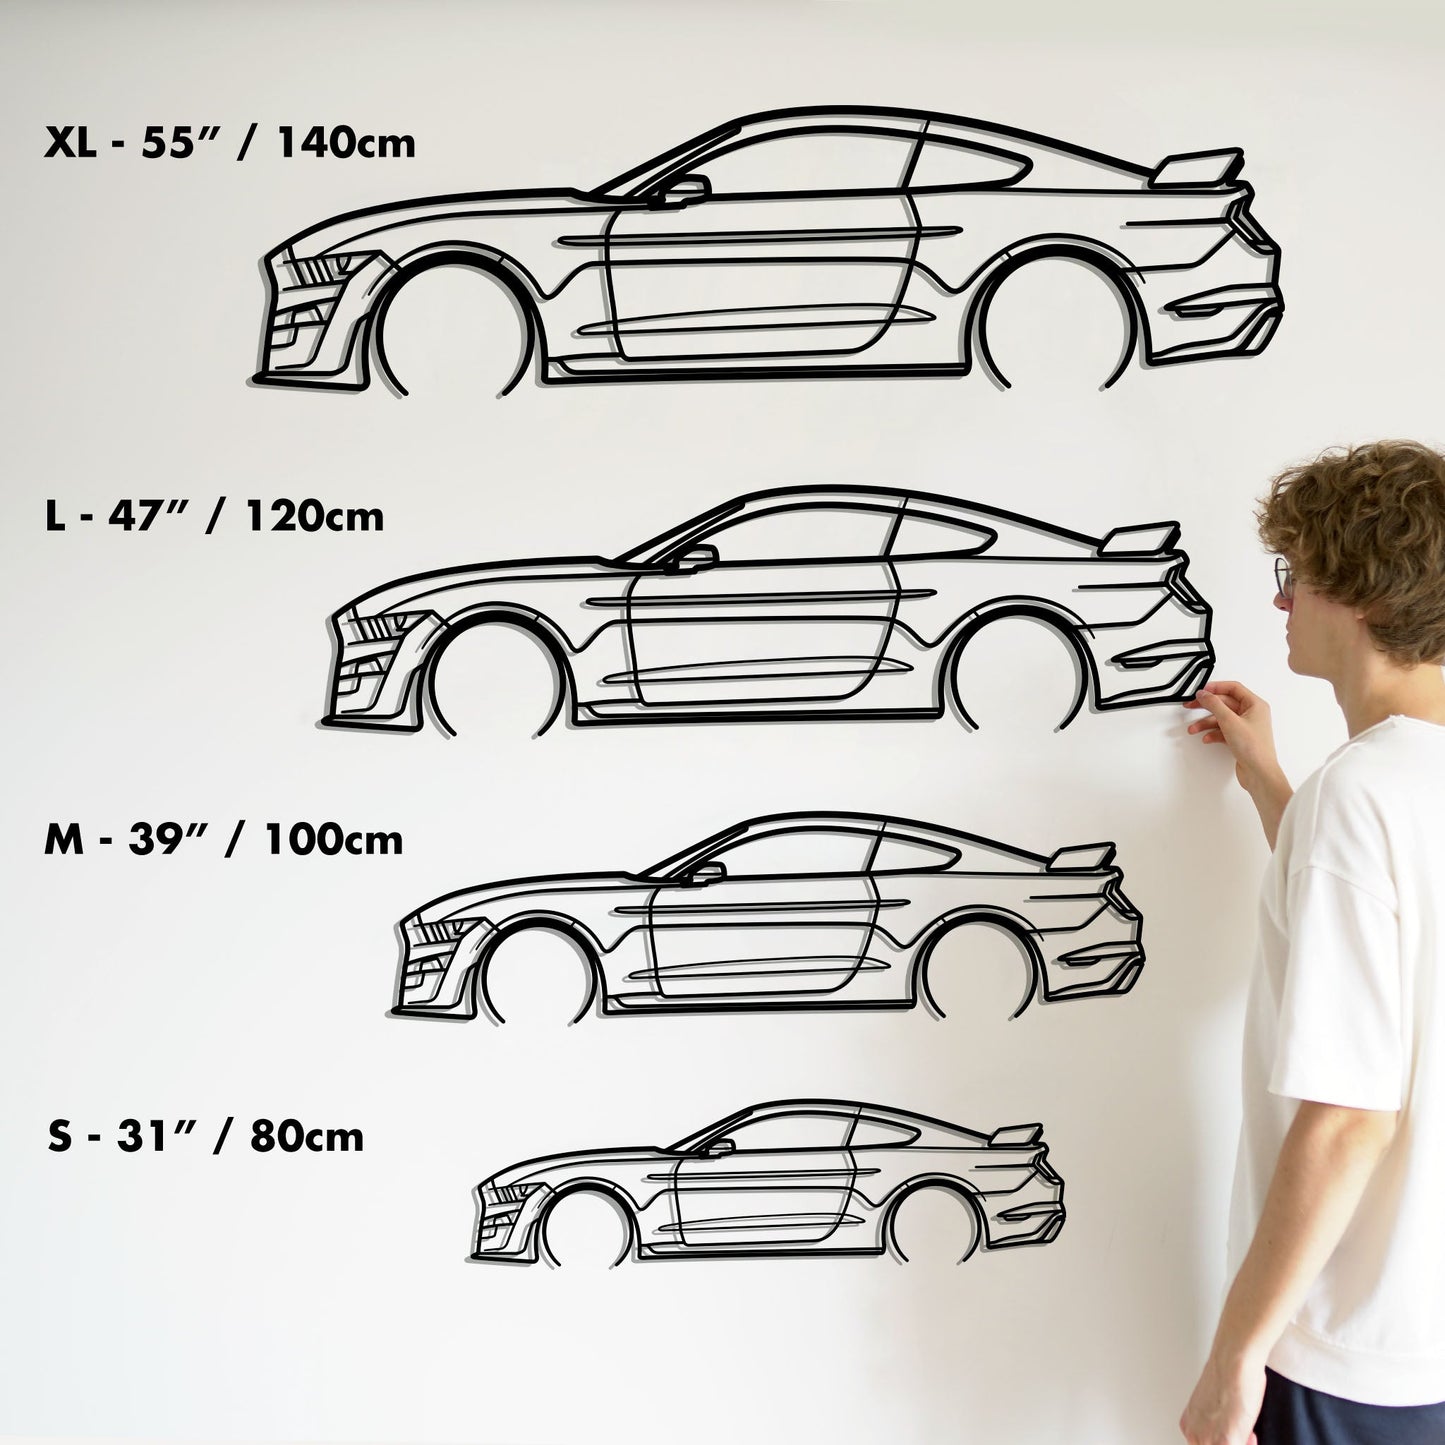 Ford Mustang Shelby GT500 Metal Silhouette Metal Wall Art